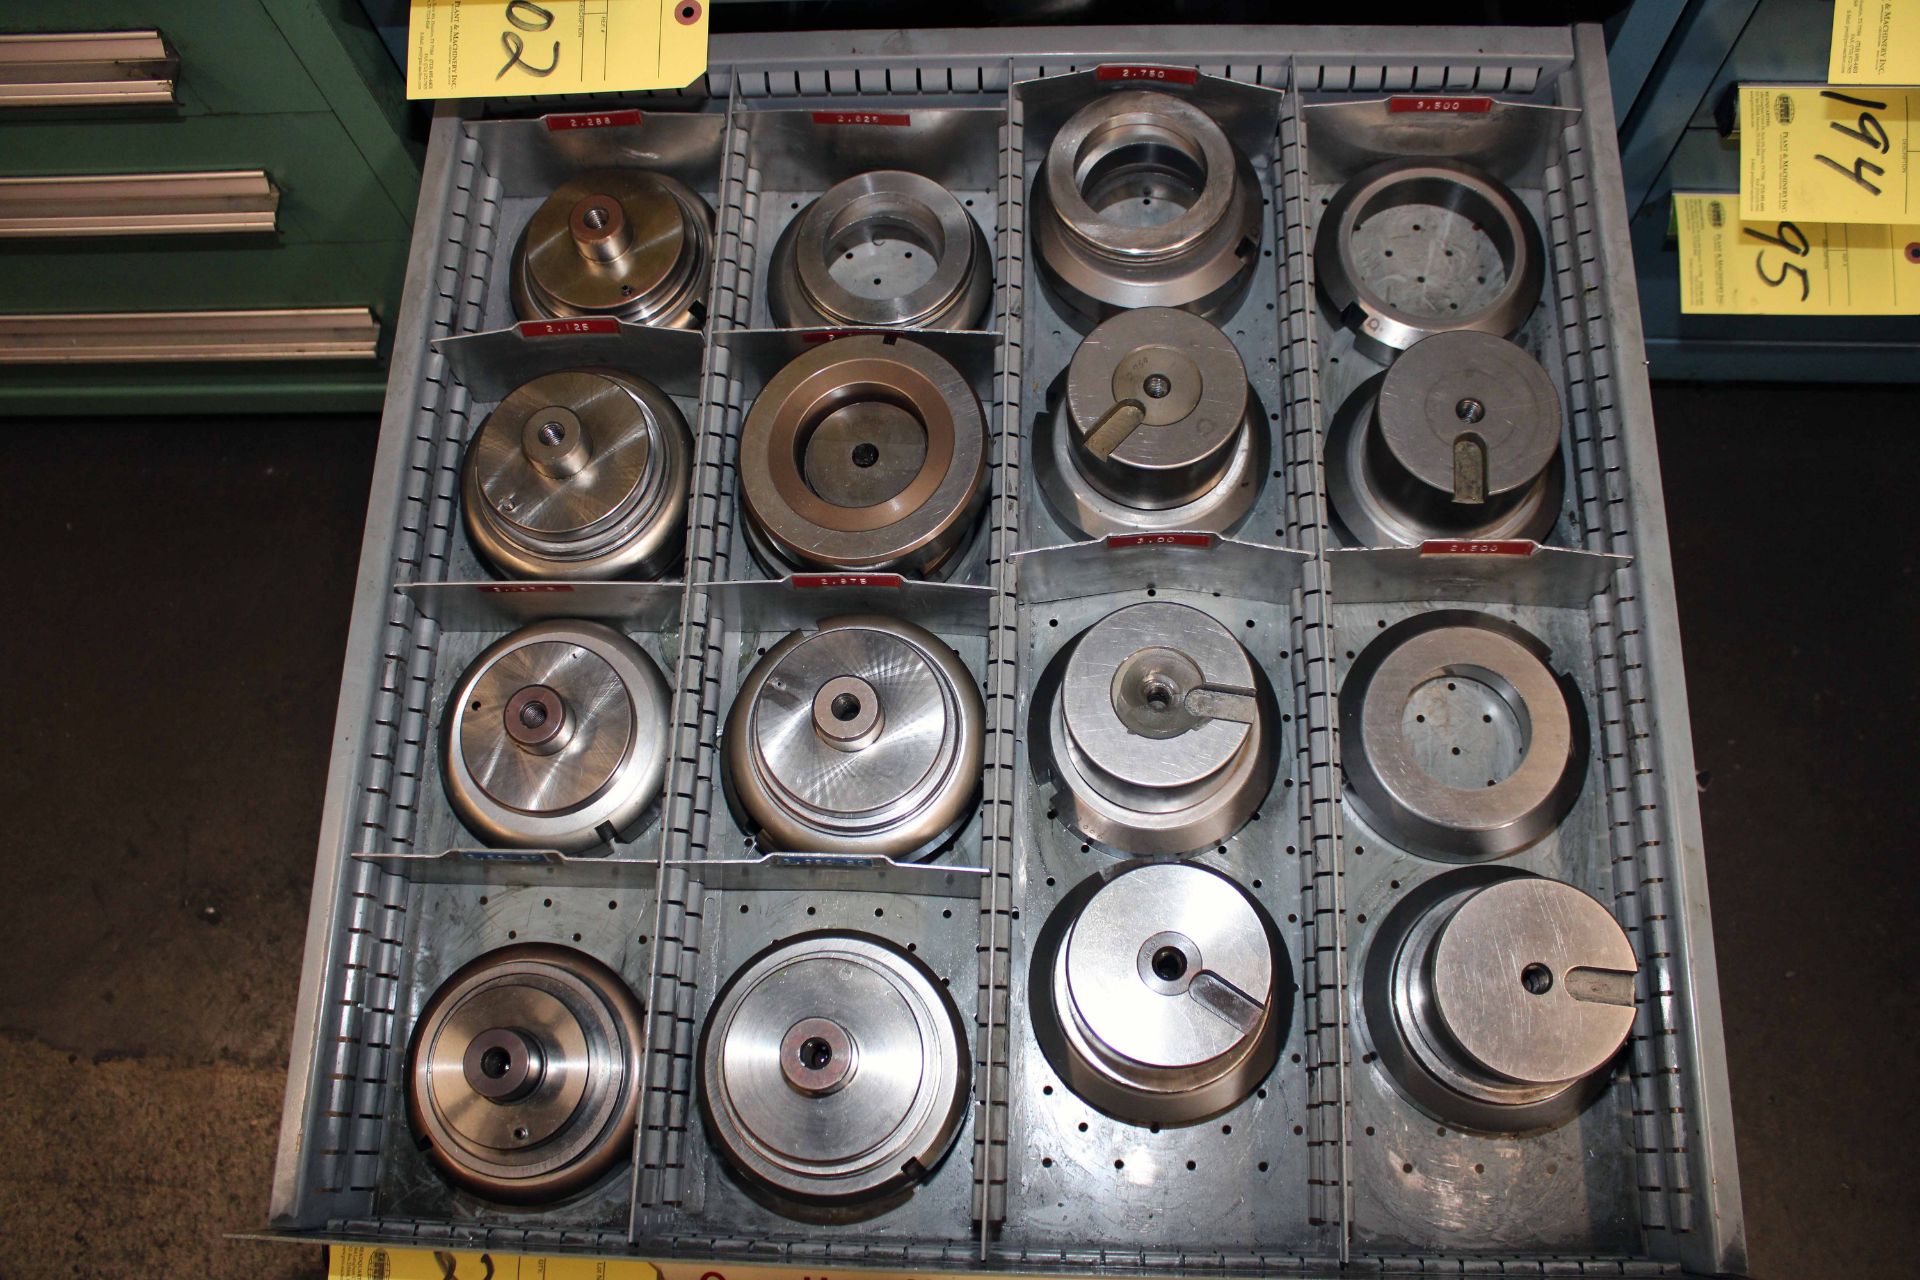 LOT CONSISTING OF: Punch press dies, round, 3-1/2"